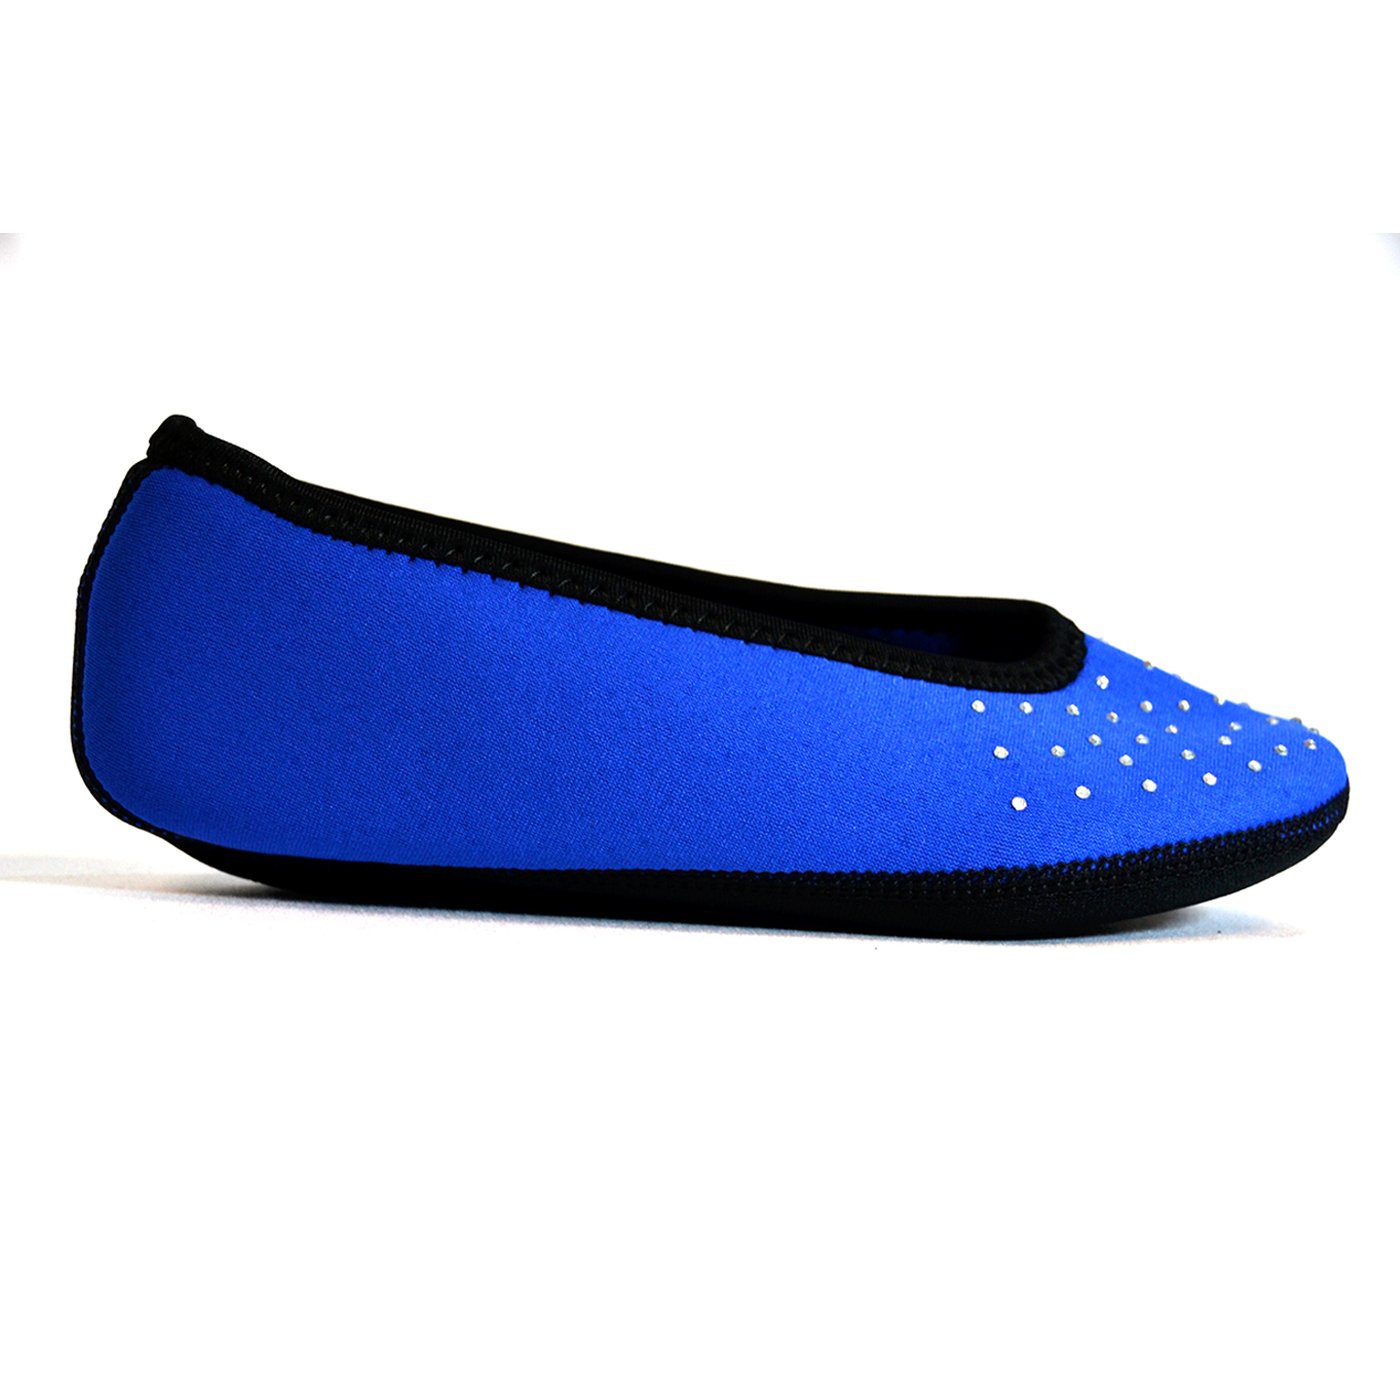 NuFoot Sparkle Ballet Flats Women's Shoes Best Foldable & Flexible Flats Slipper Socks Travel Slippers & Exercise Shoes Dance Shoes Yoga Socks House Shoes Indoor Slippers Royal Blue X-Large